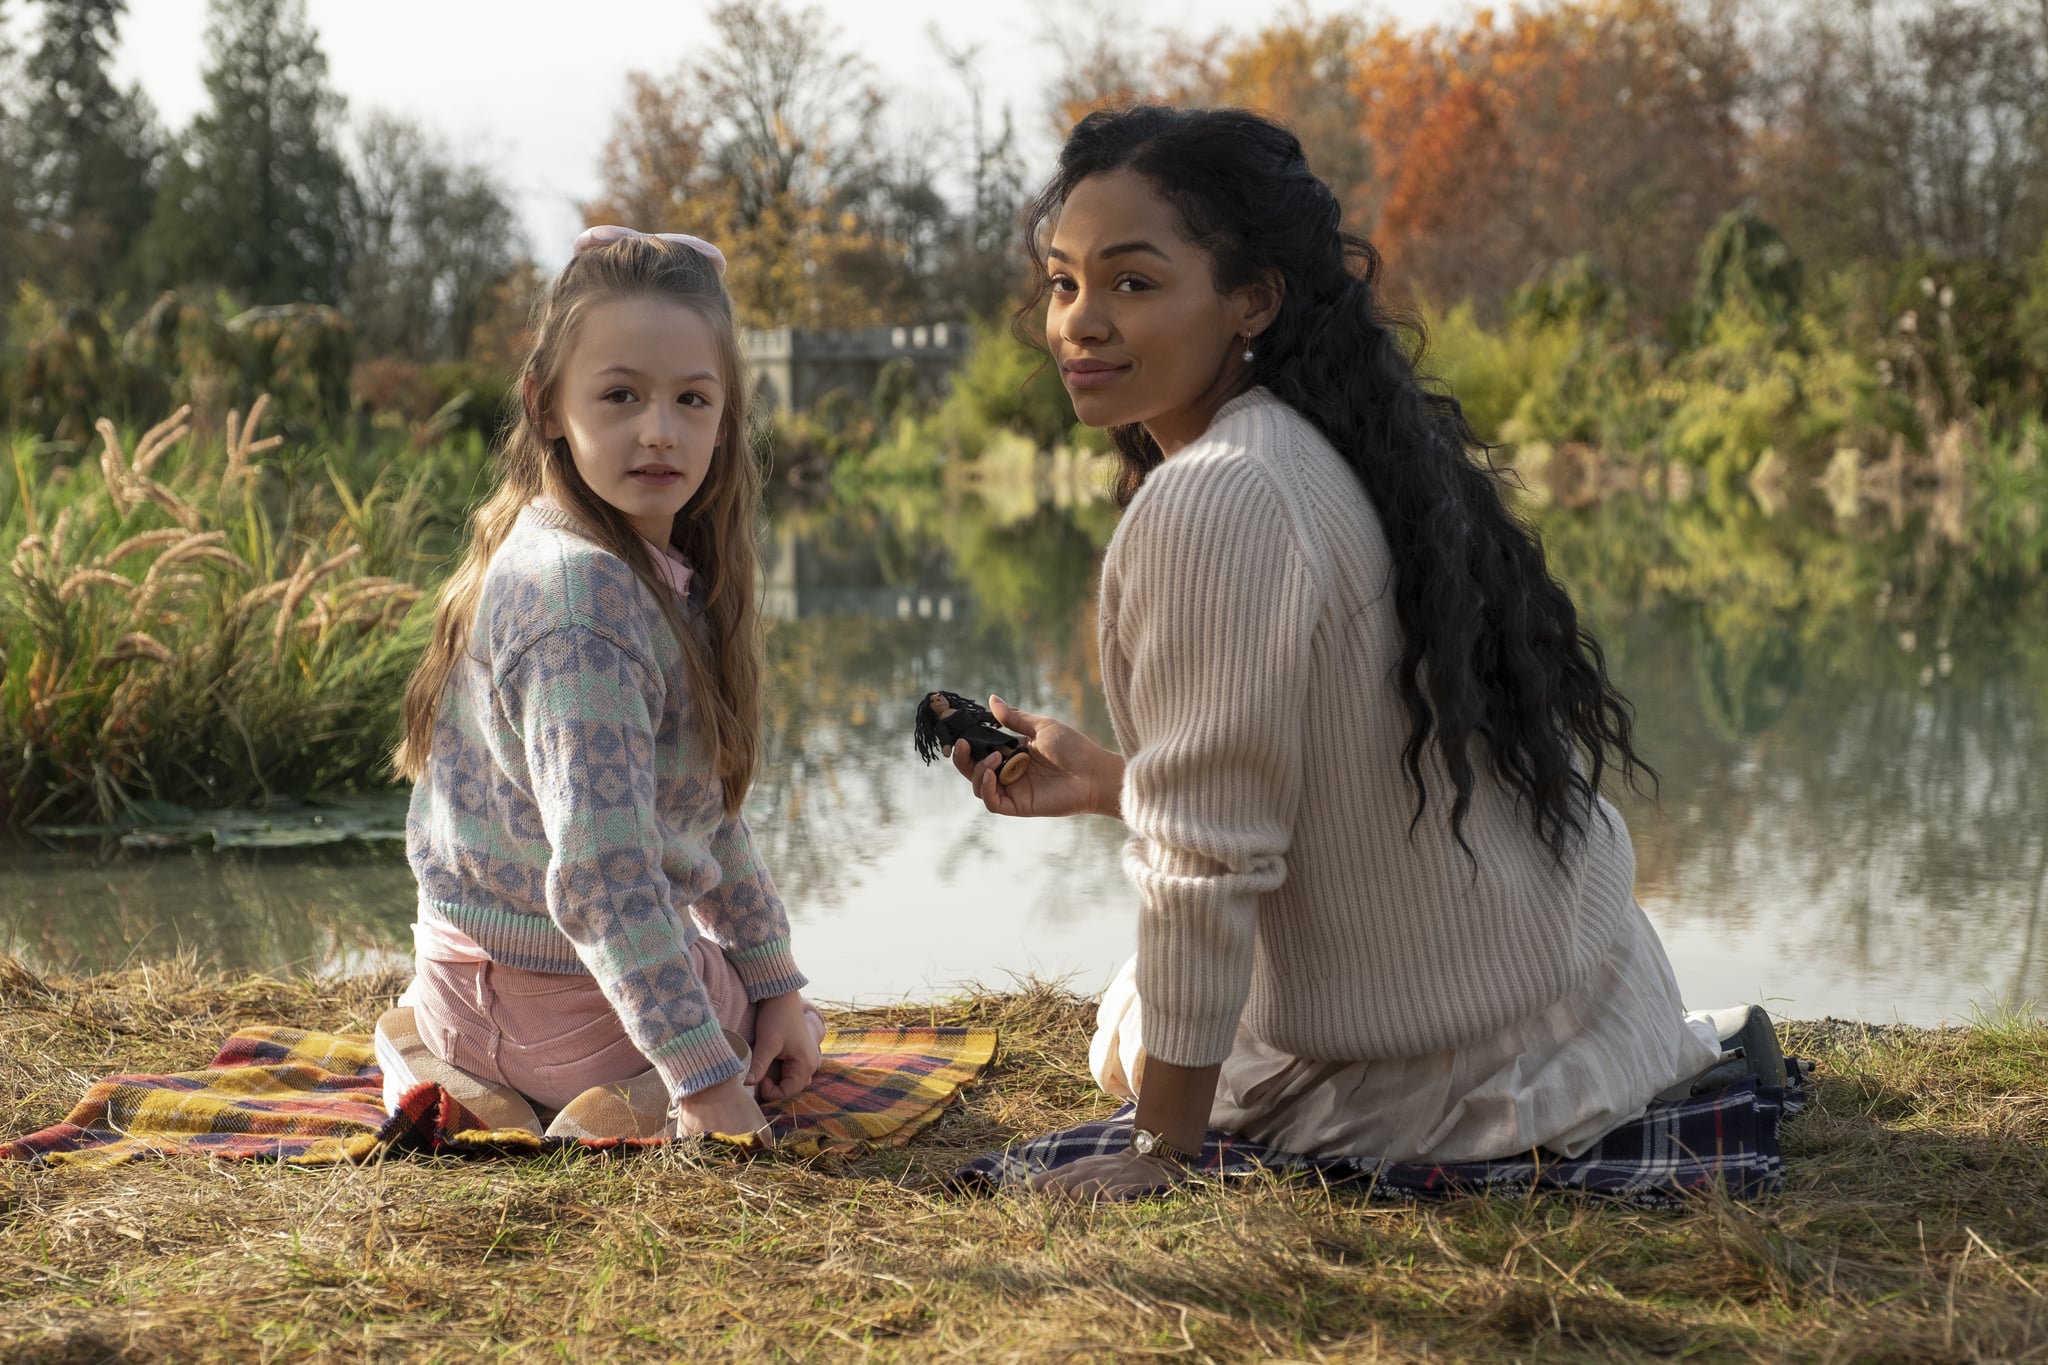 THE HAUNTING OF BLY MANOR (L to R) AMELIE SMITH as FLORA and TAHIRAH SHARIF as REBECCA JESSEL in THE HAUNTING OF BLY MANOR Cr. EIKE SCHROTER/NETFLIX  2020